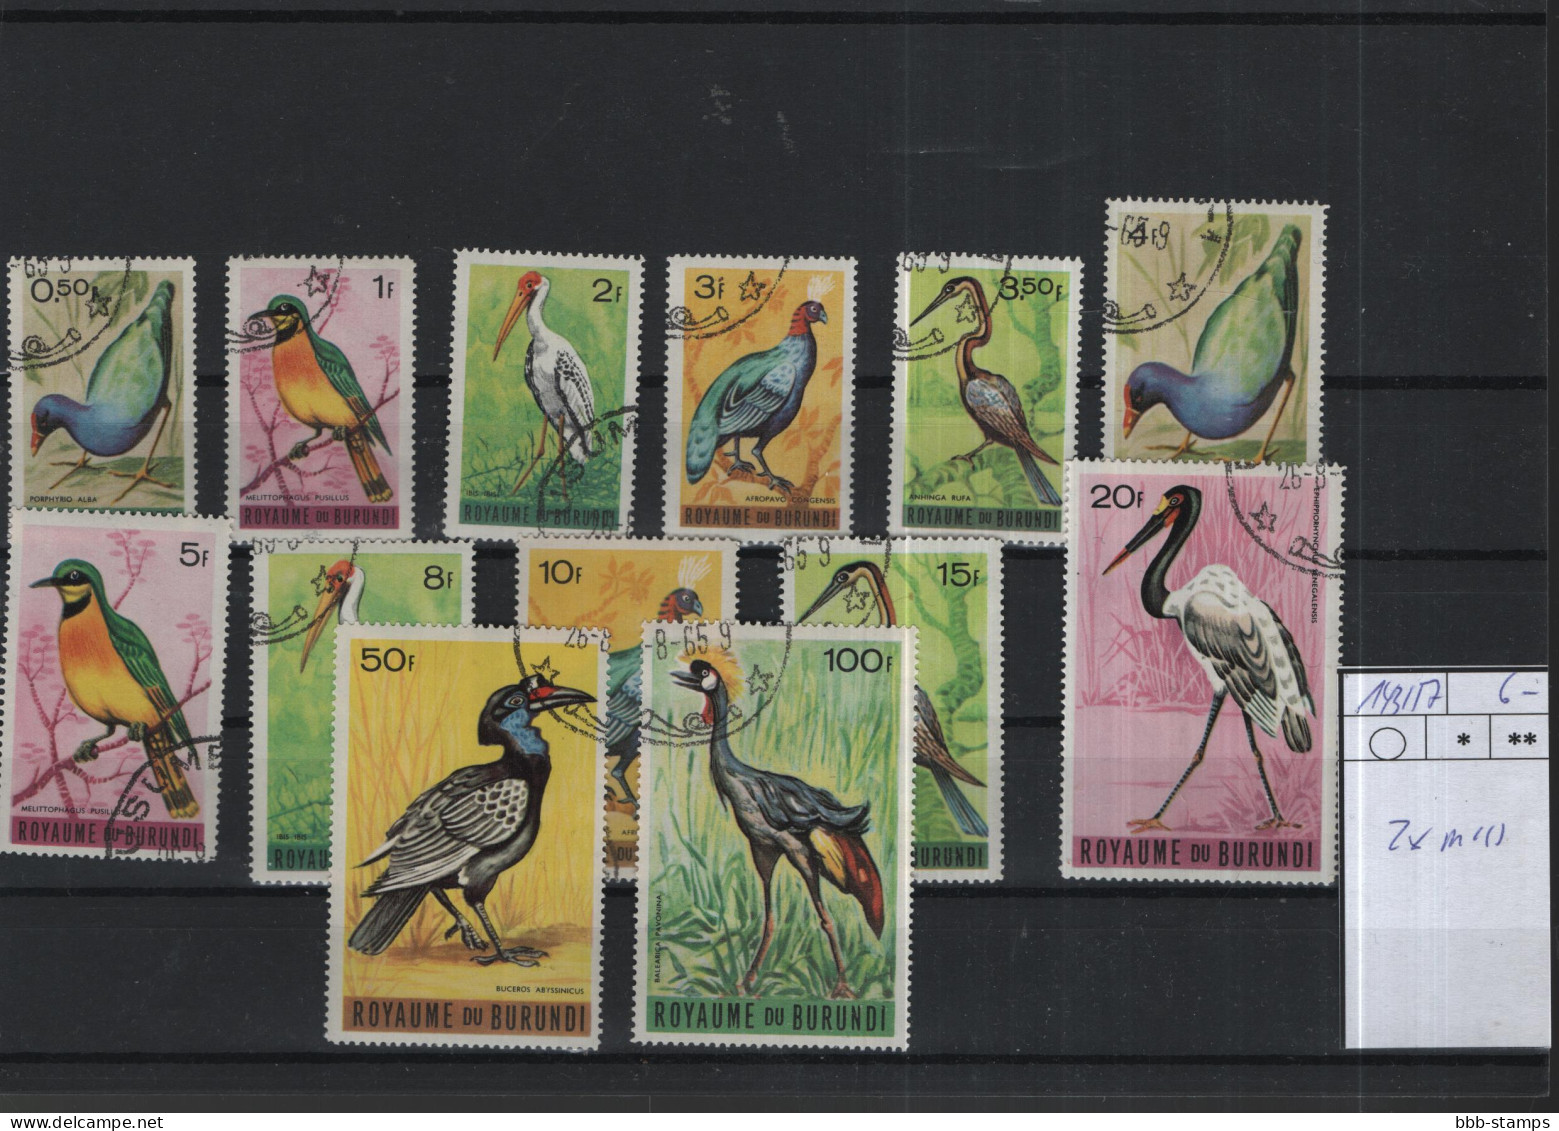 Burundi  Birds Theme  Michel Cast.No. Used 143/157 Two Values Missing - Used Stamps